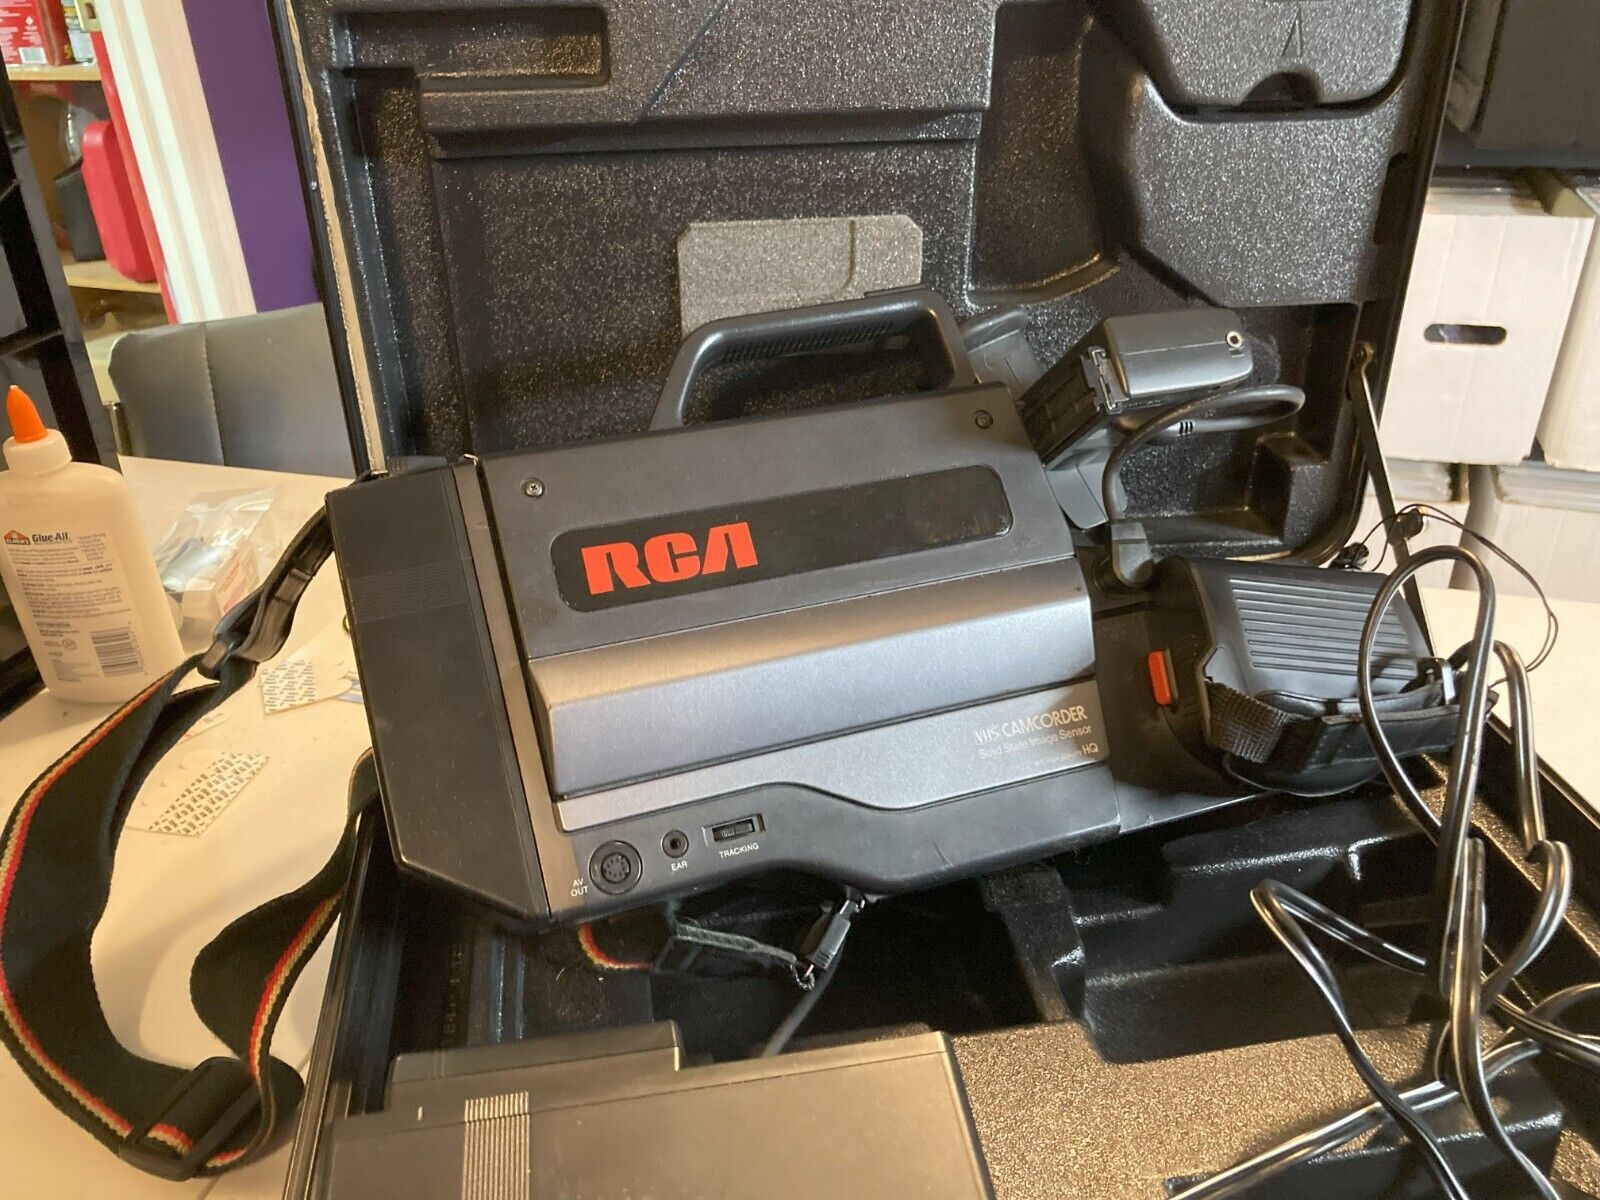 2 Vintage RCA Camcorders - Have you been looking for these gems? - Untested